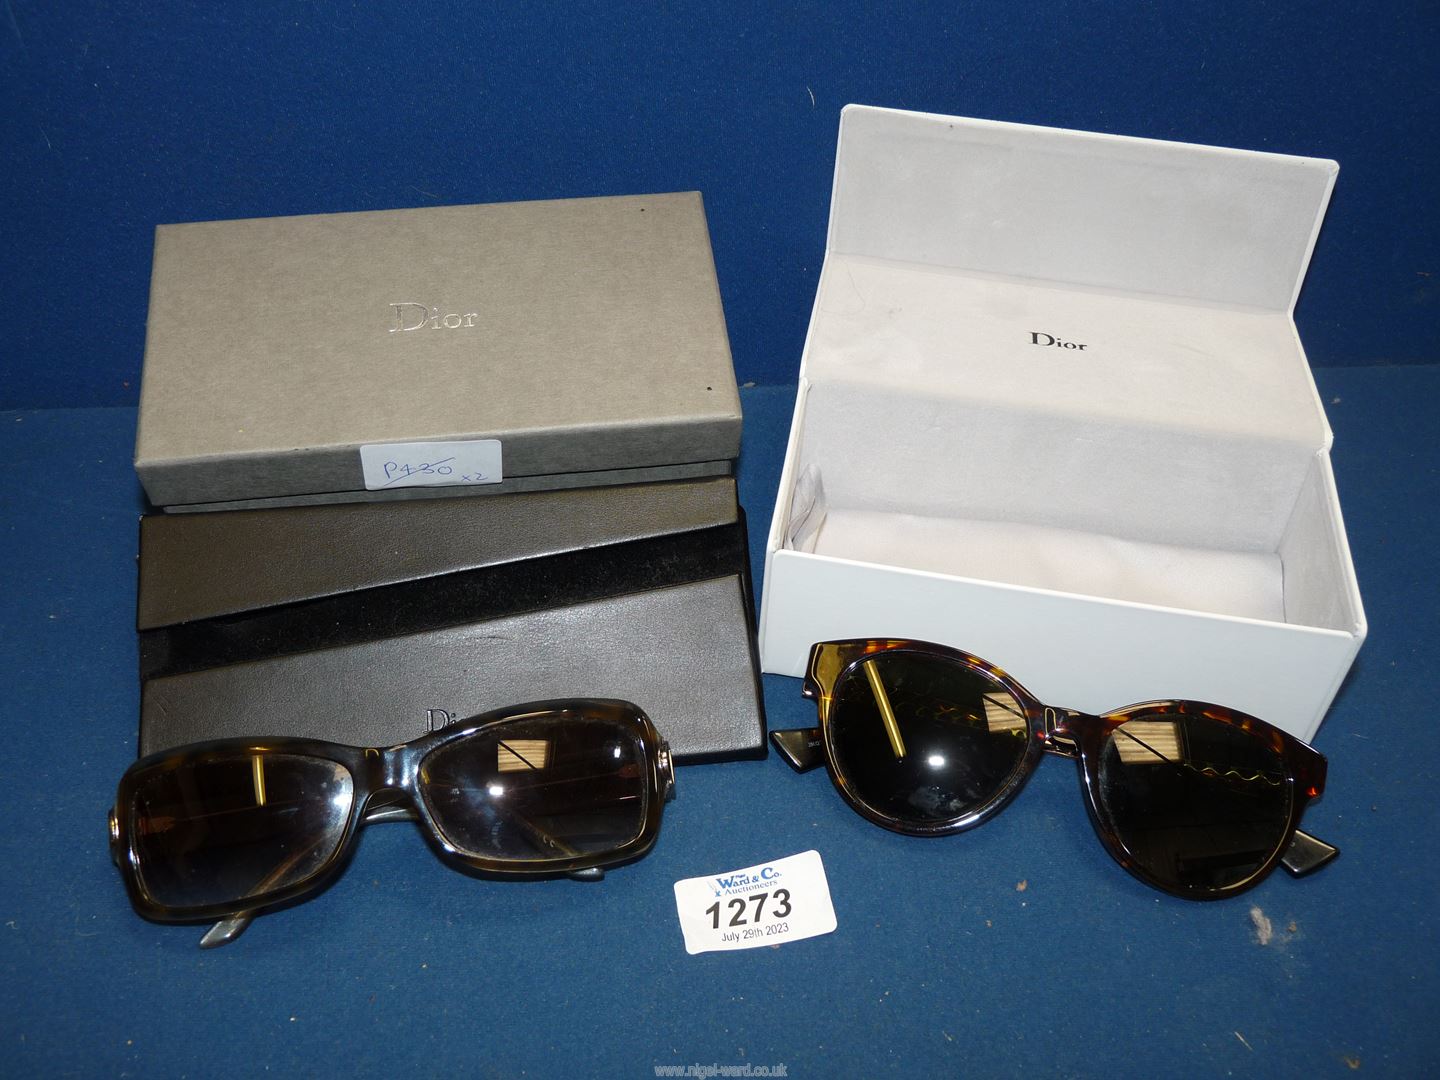 Two pairs of Christian Dior sunglasses (pre-worn) both cased and one with Dior box.